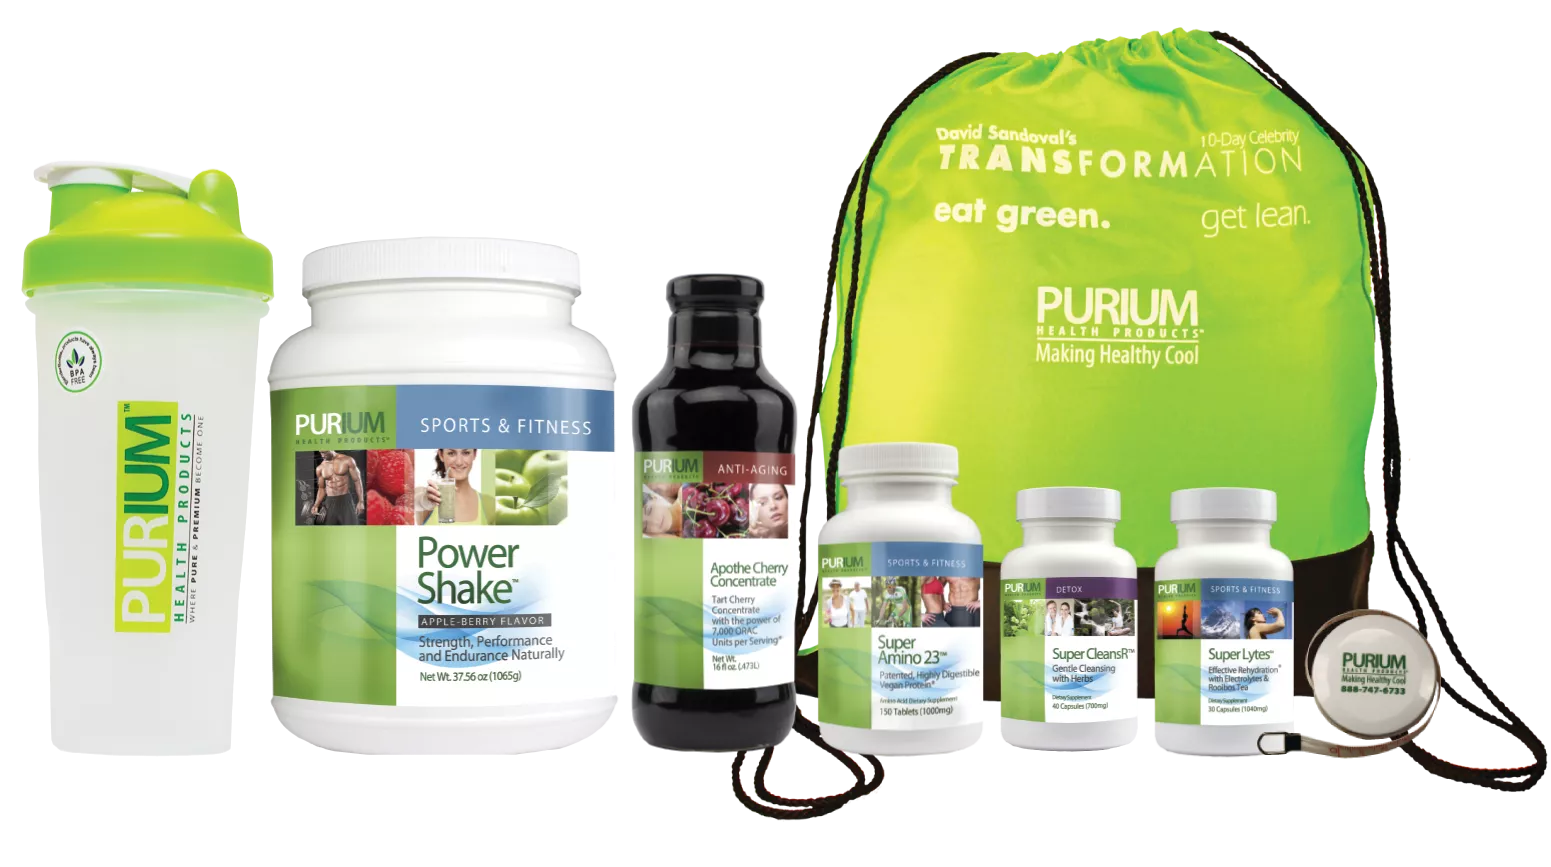 Purium Health Products 10-day Cleanse (review)